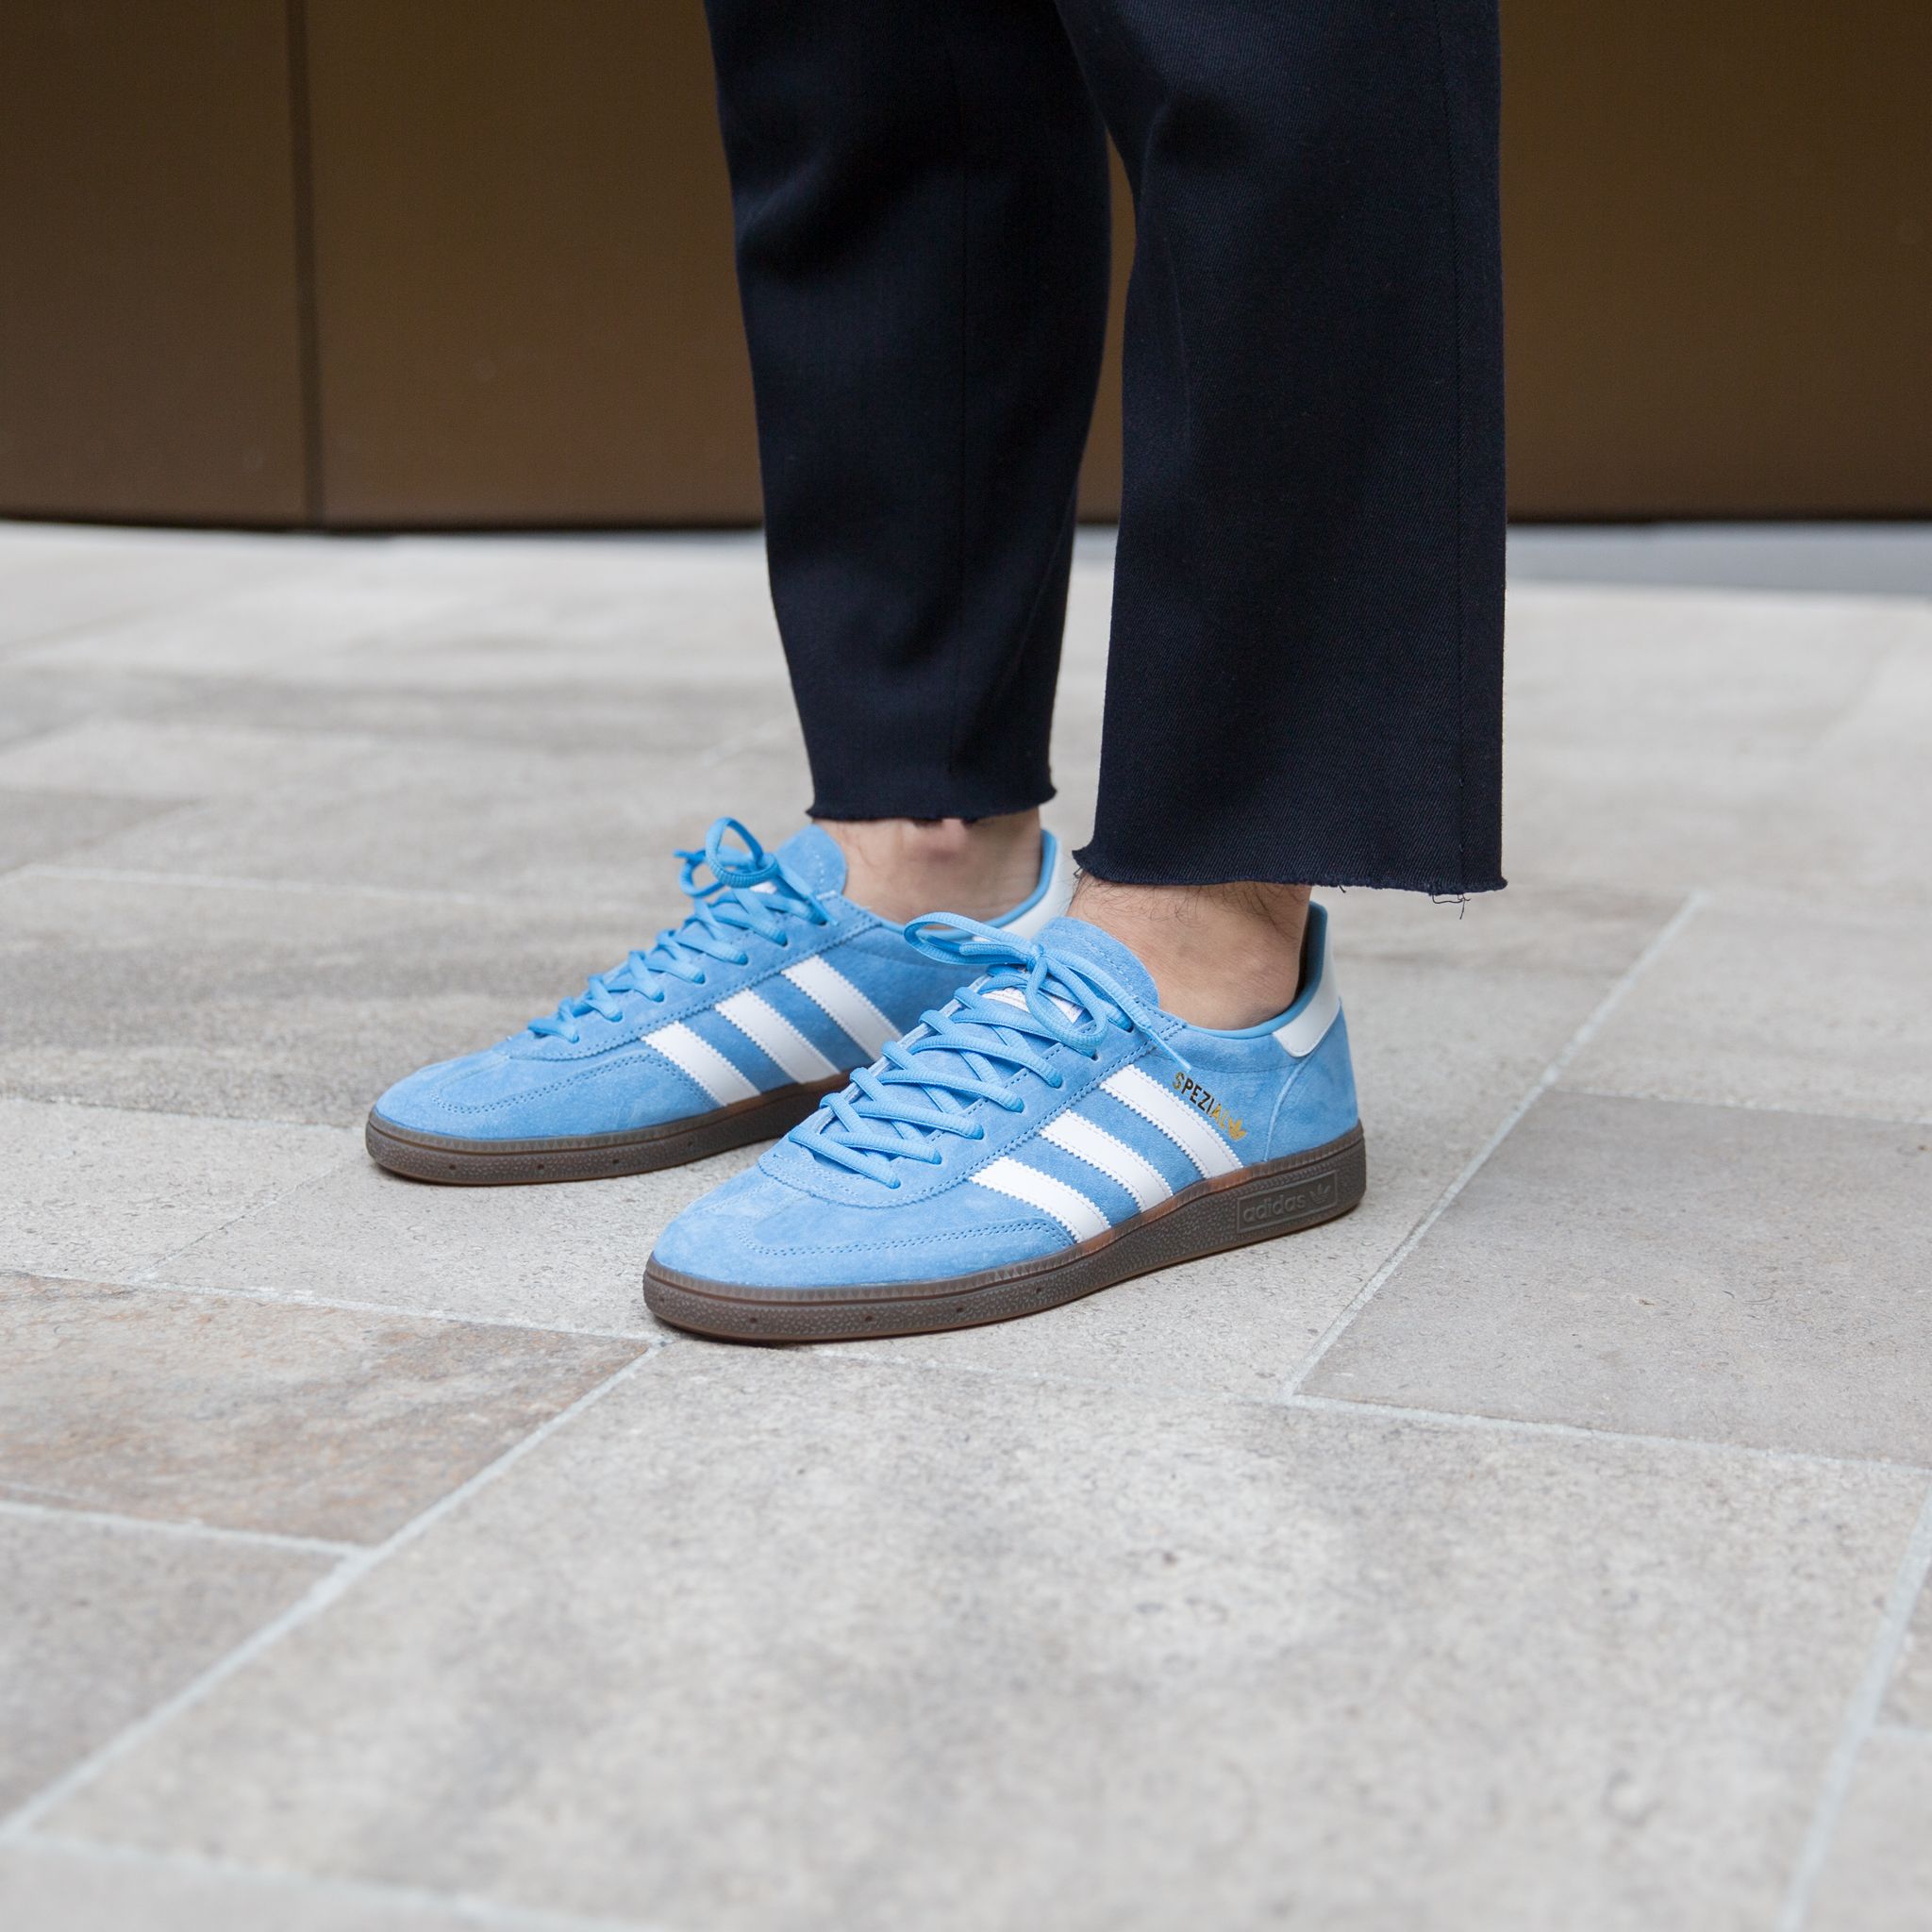 Udlevering tæt forværres Twitter 上的 Titolo："another 1 on #sale 🌟 Adidas Handball Spezial - Light  Blue/Footwear White/Gum5 web S H O P ☀ https://t.co/33mfACKRmL #adidas  #handball #spezial #handballspezial #sale #sales #sneakers  https://t.co/itcLVgZNp1" / Twitter